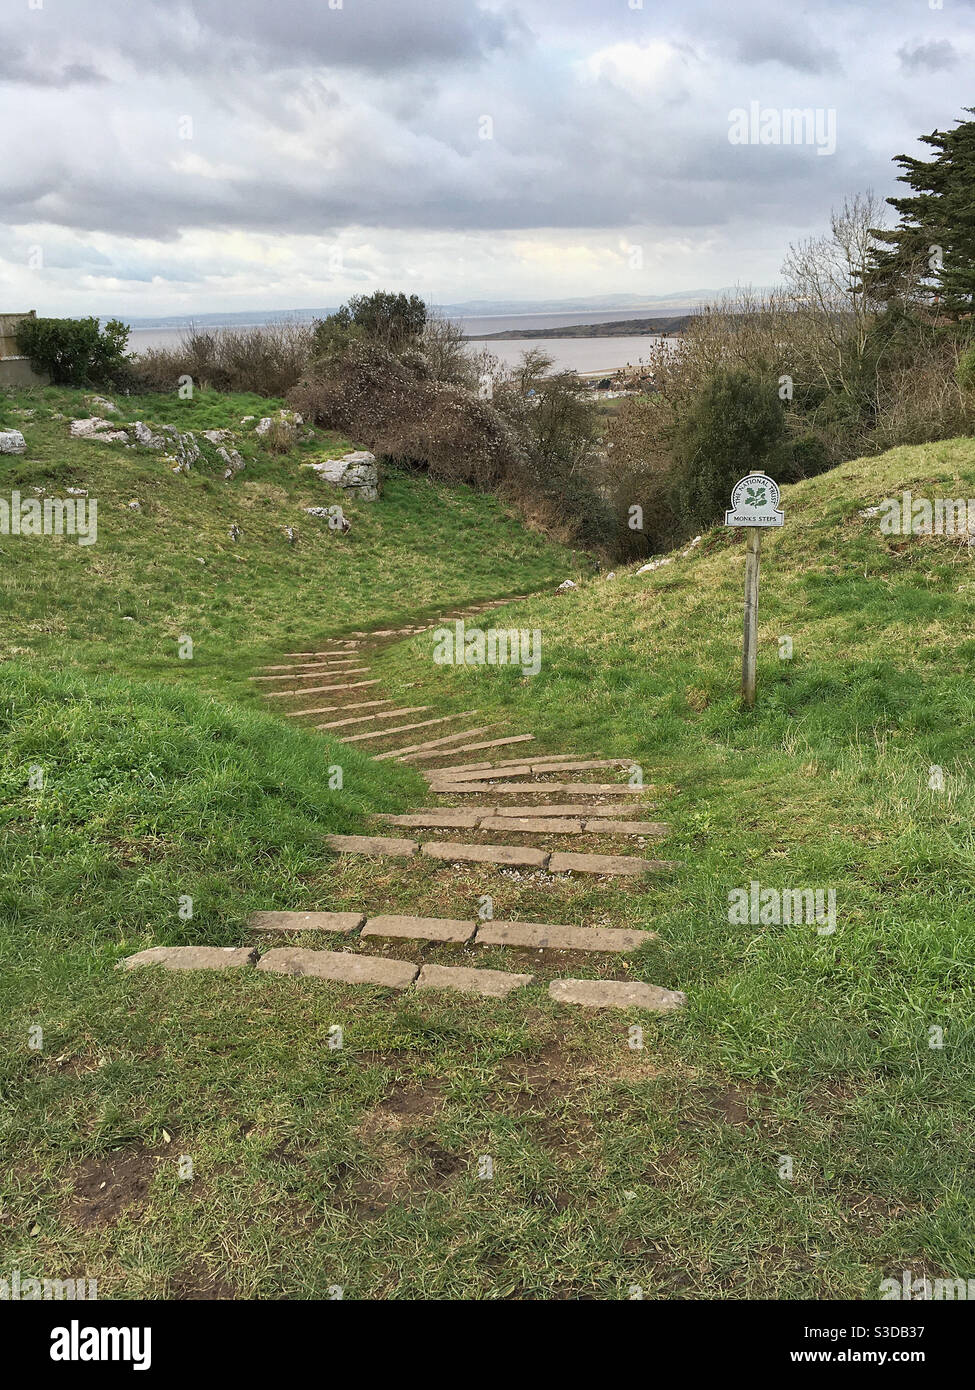 Monk’s Steps, an ancient pathway in Weston-super-Mare, UK photographed from the public highway Stock Photo